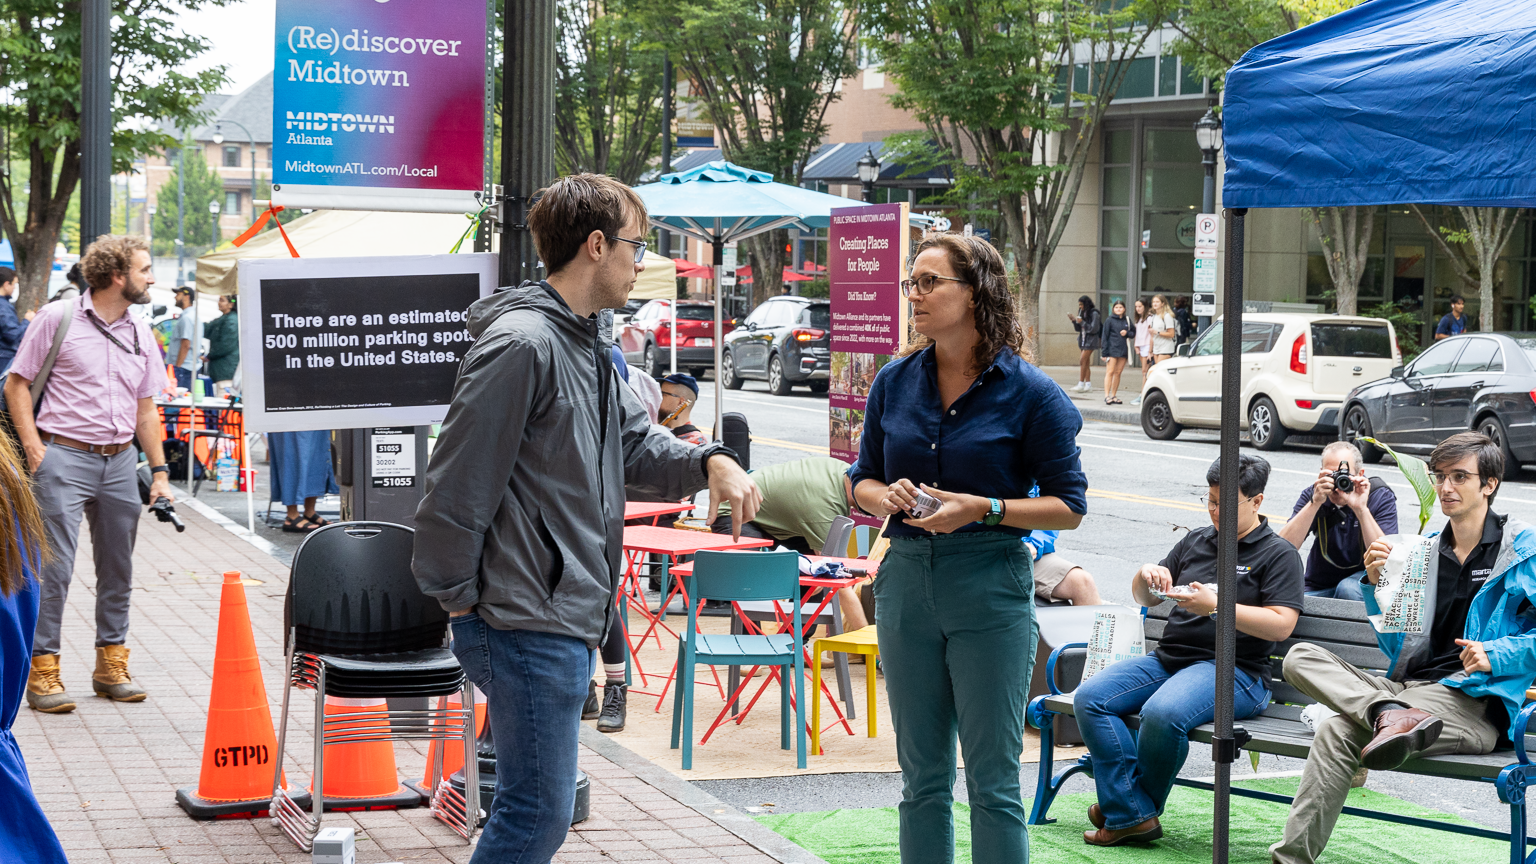 A representative from MARTA talks to a pedestrian in front of a parklet with benches and artificial turf created by the MARTA team.